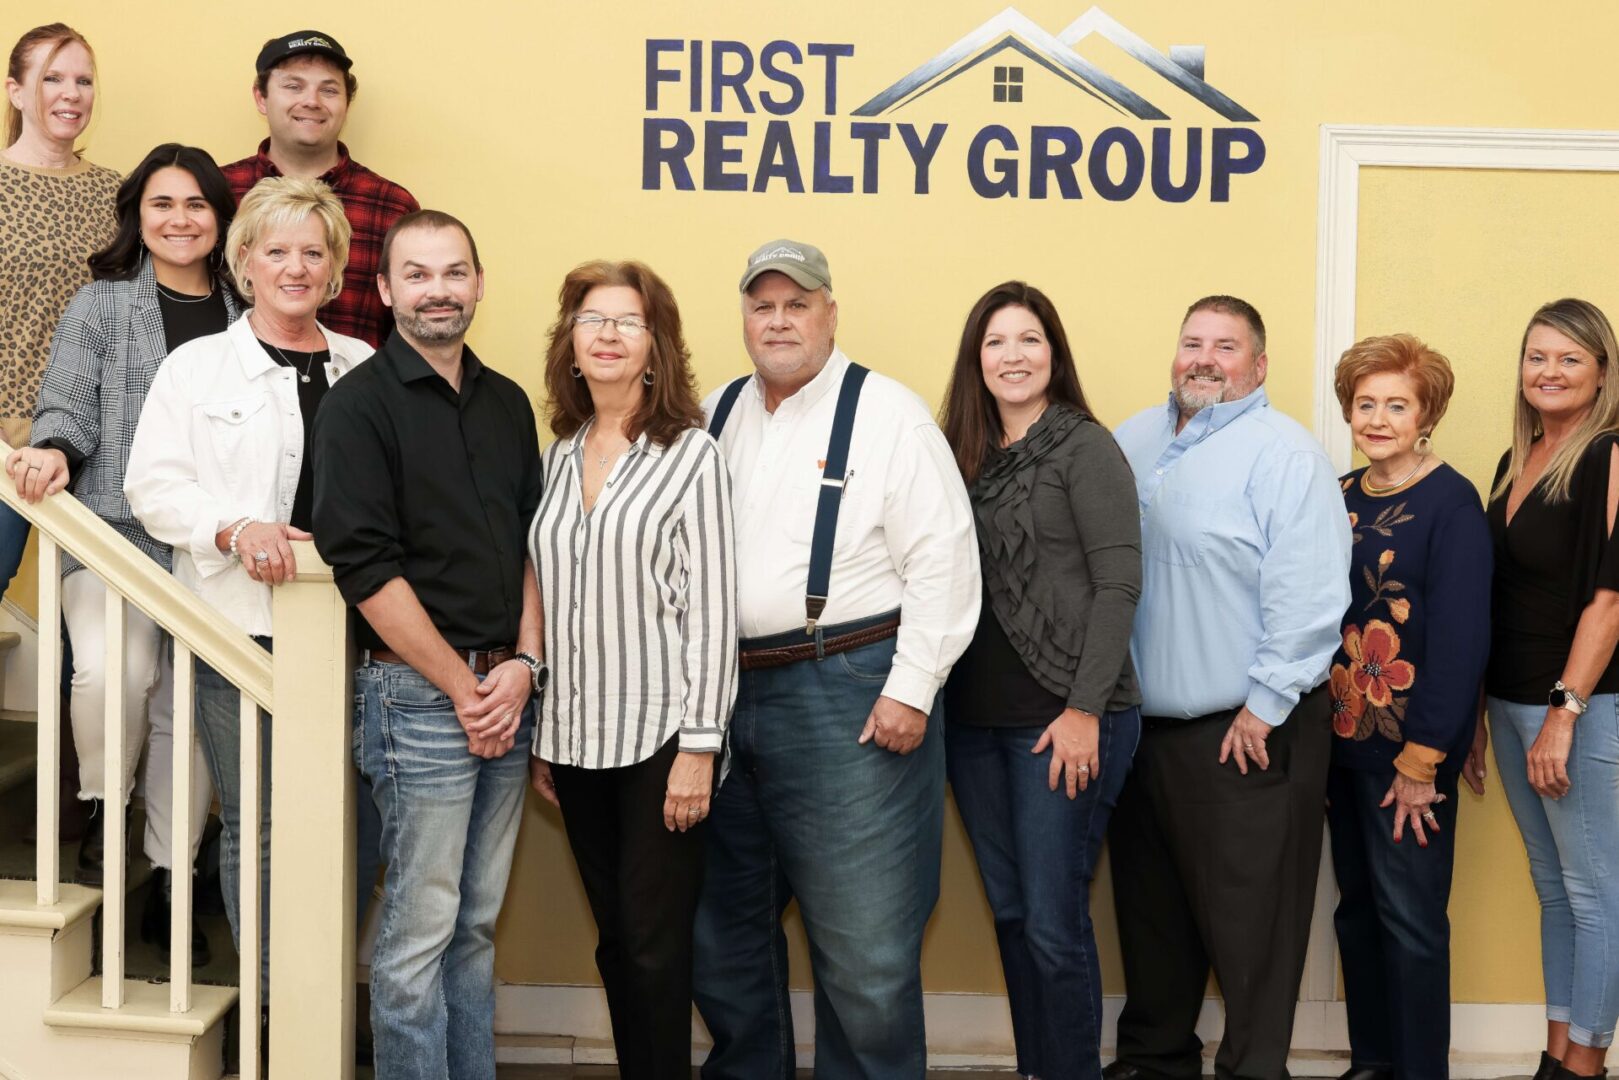 A group of people standing in front of the first realty group sign.